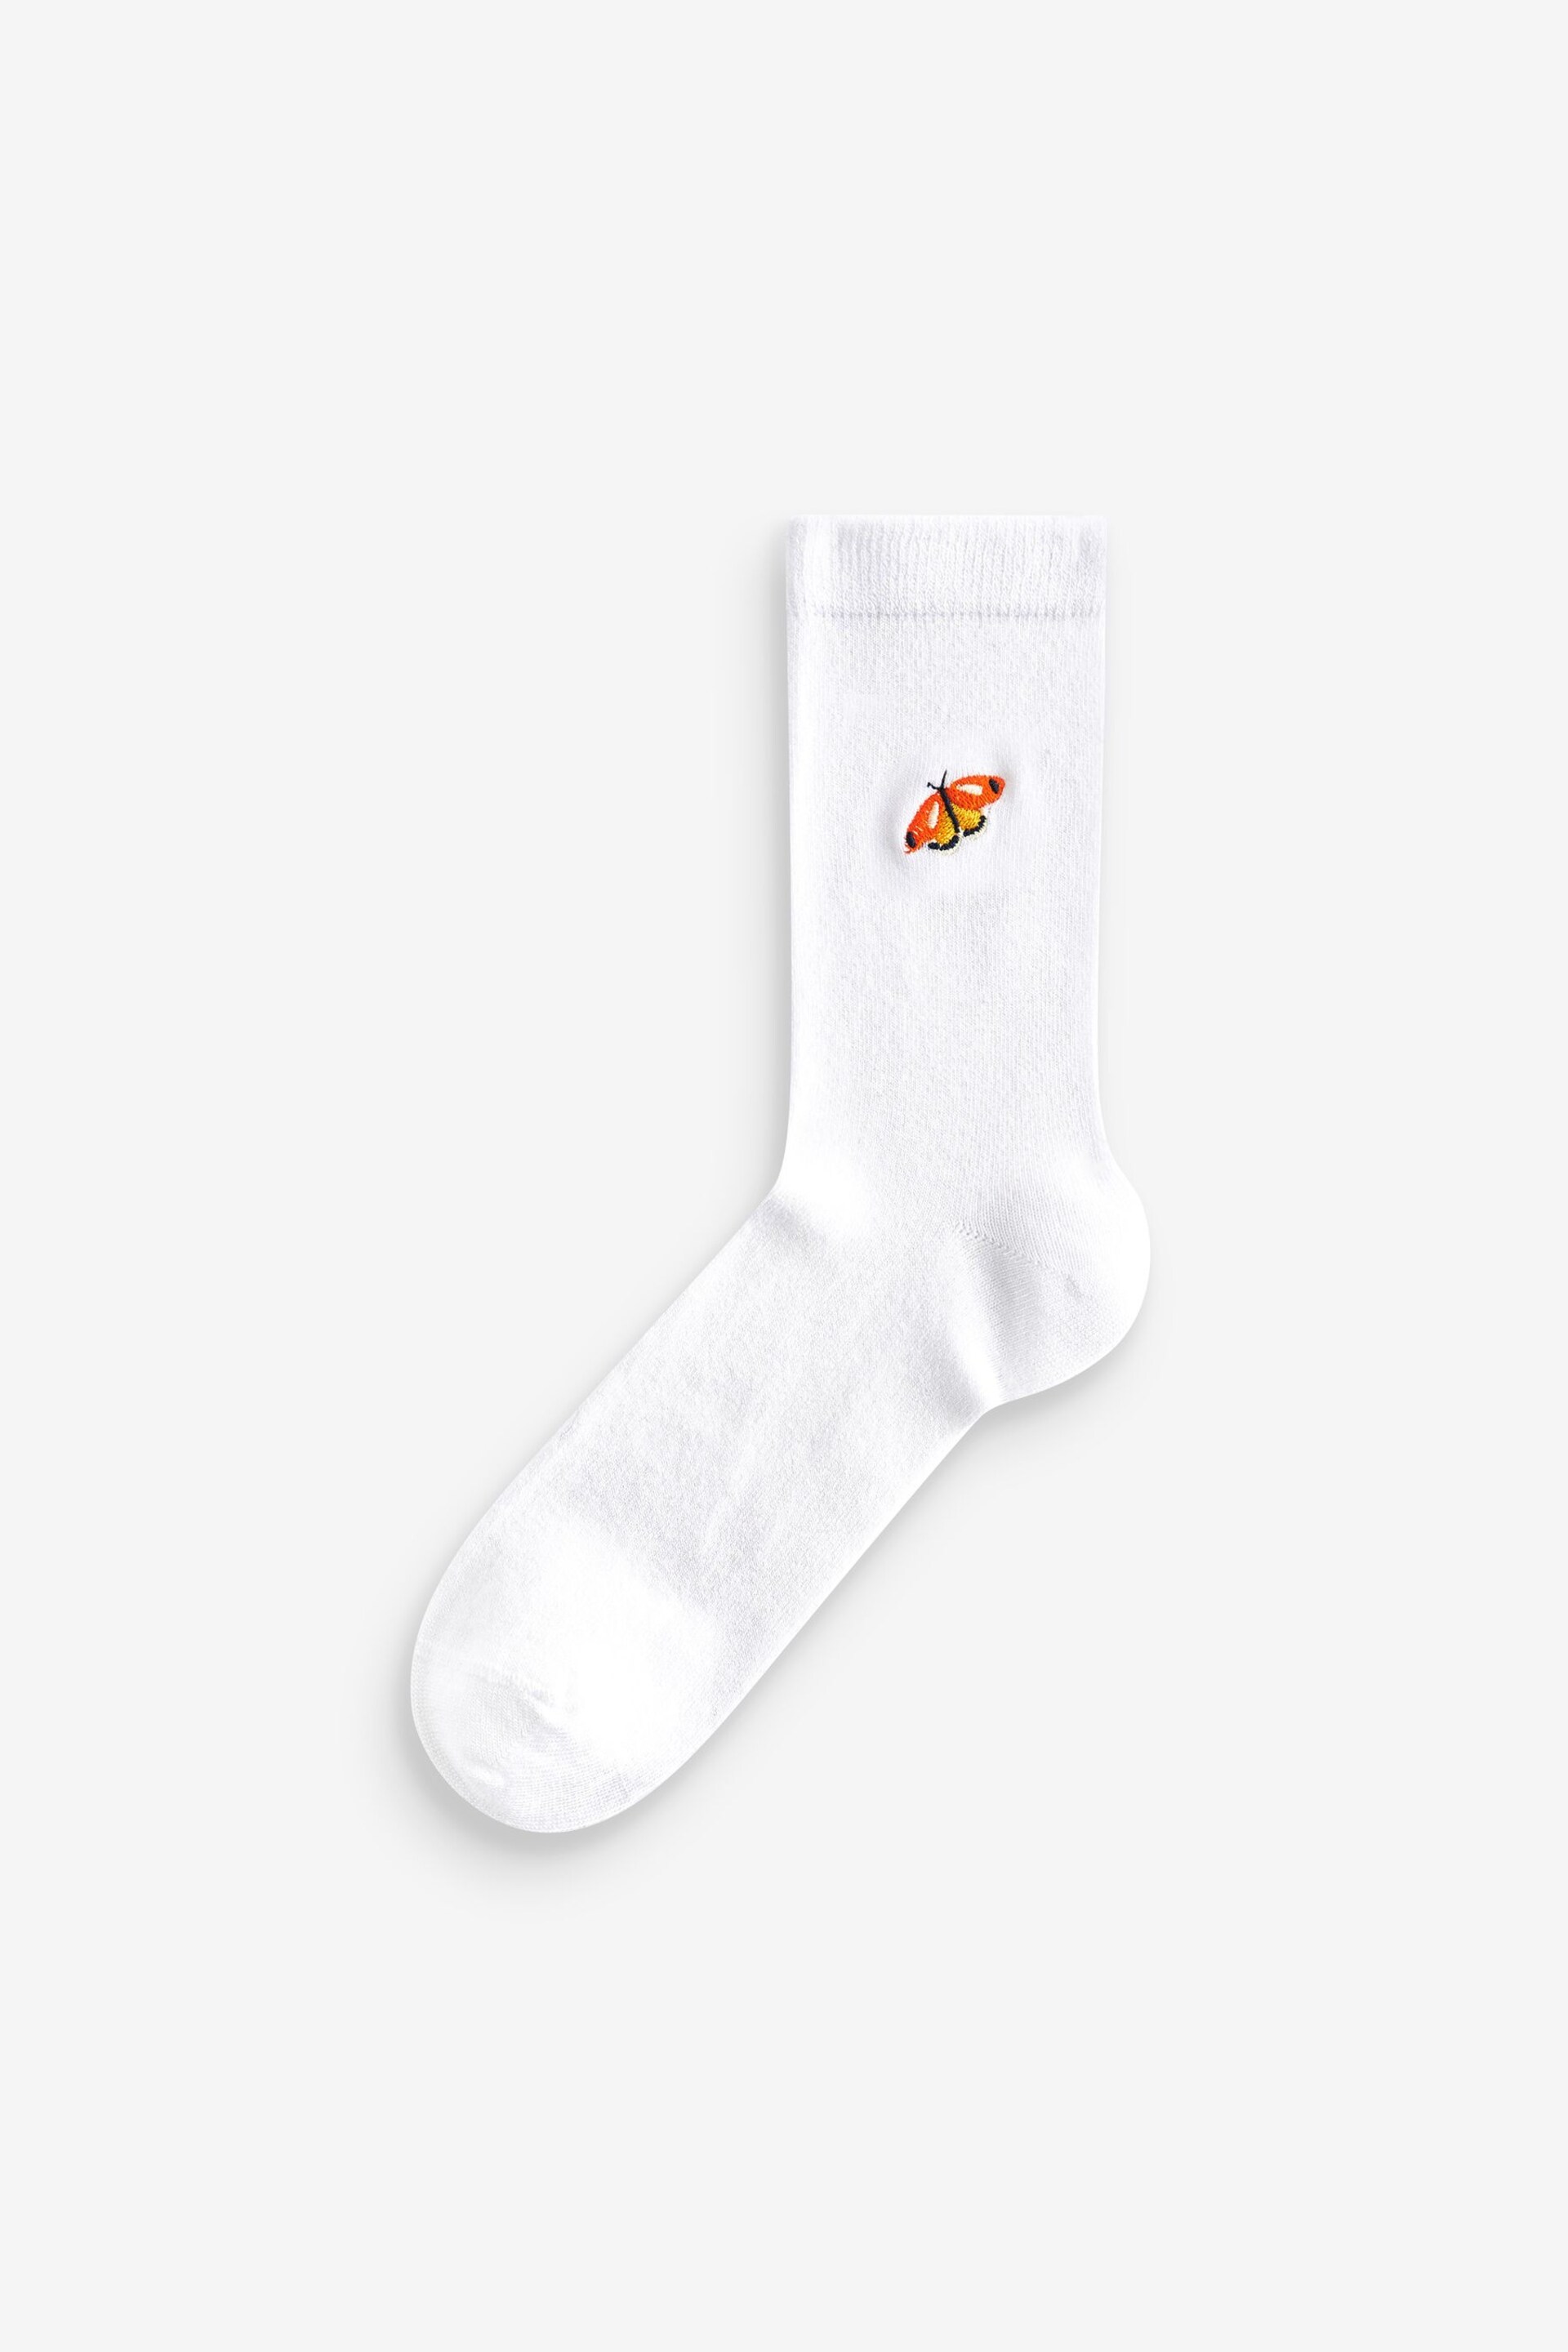 White Embroidered Motif Ankle Socks 4 Pack - Image 3 of 6